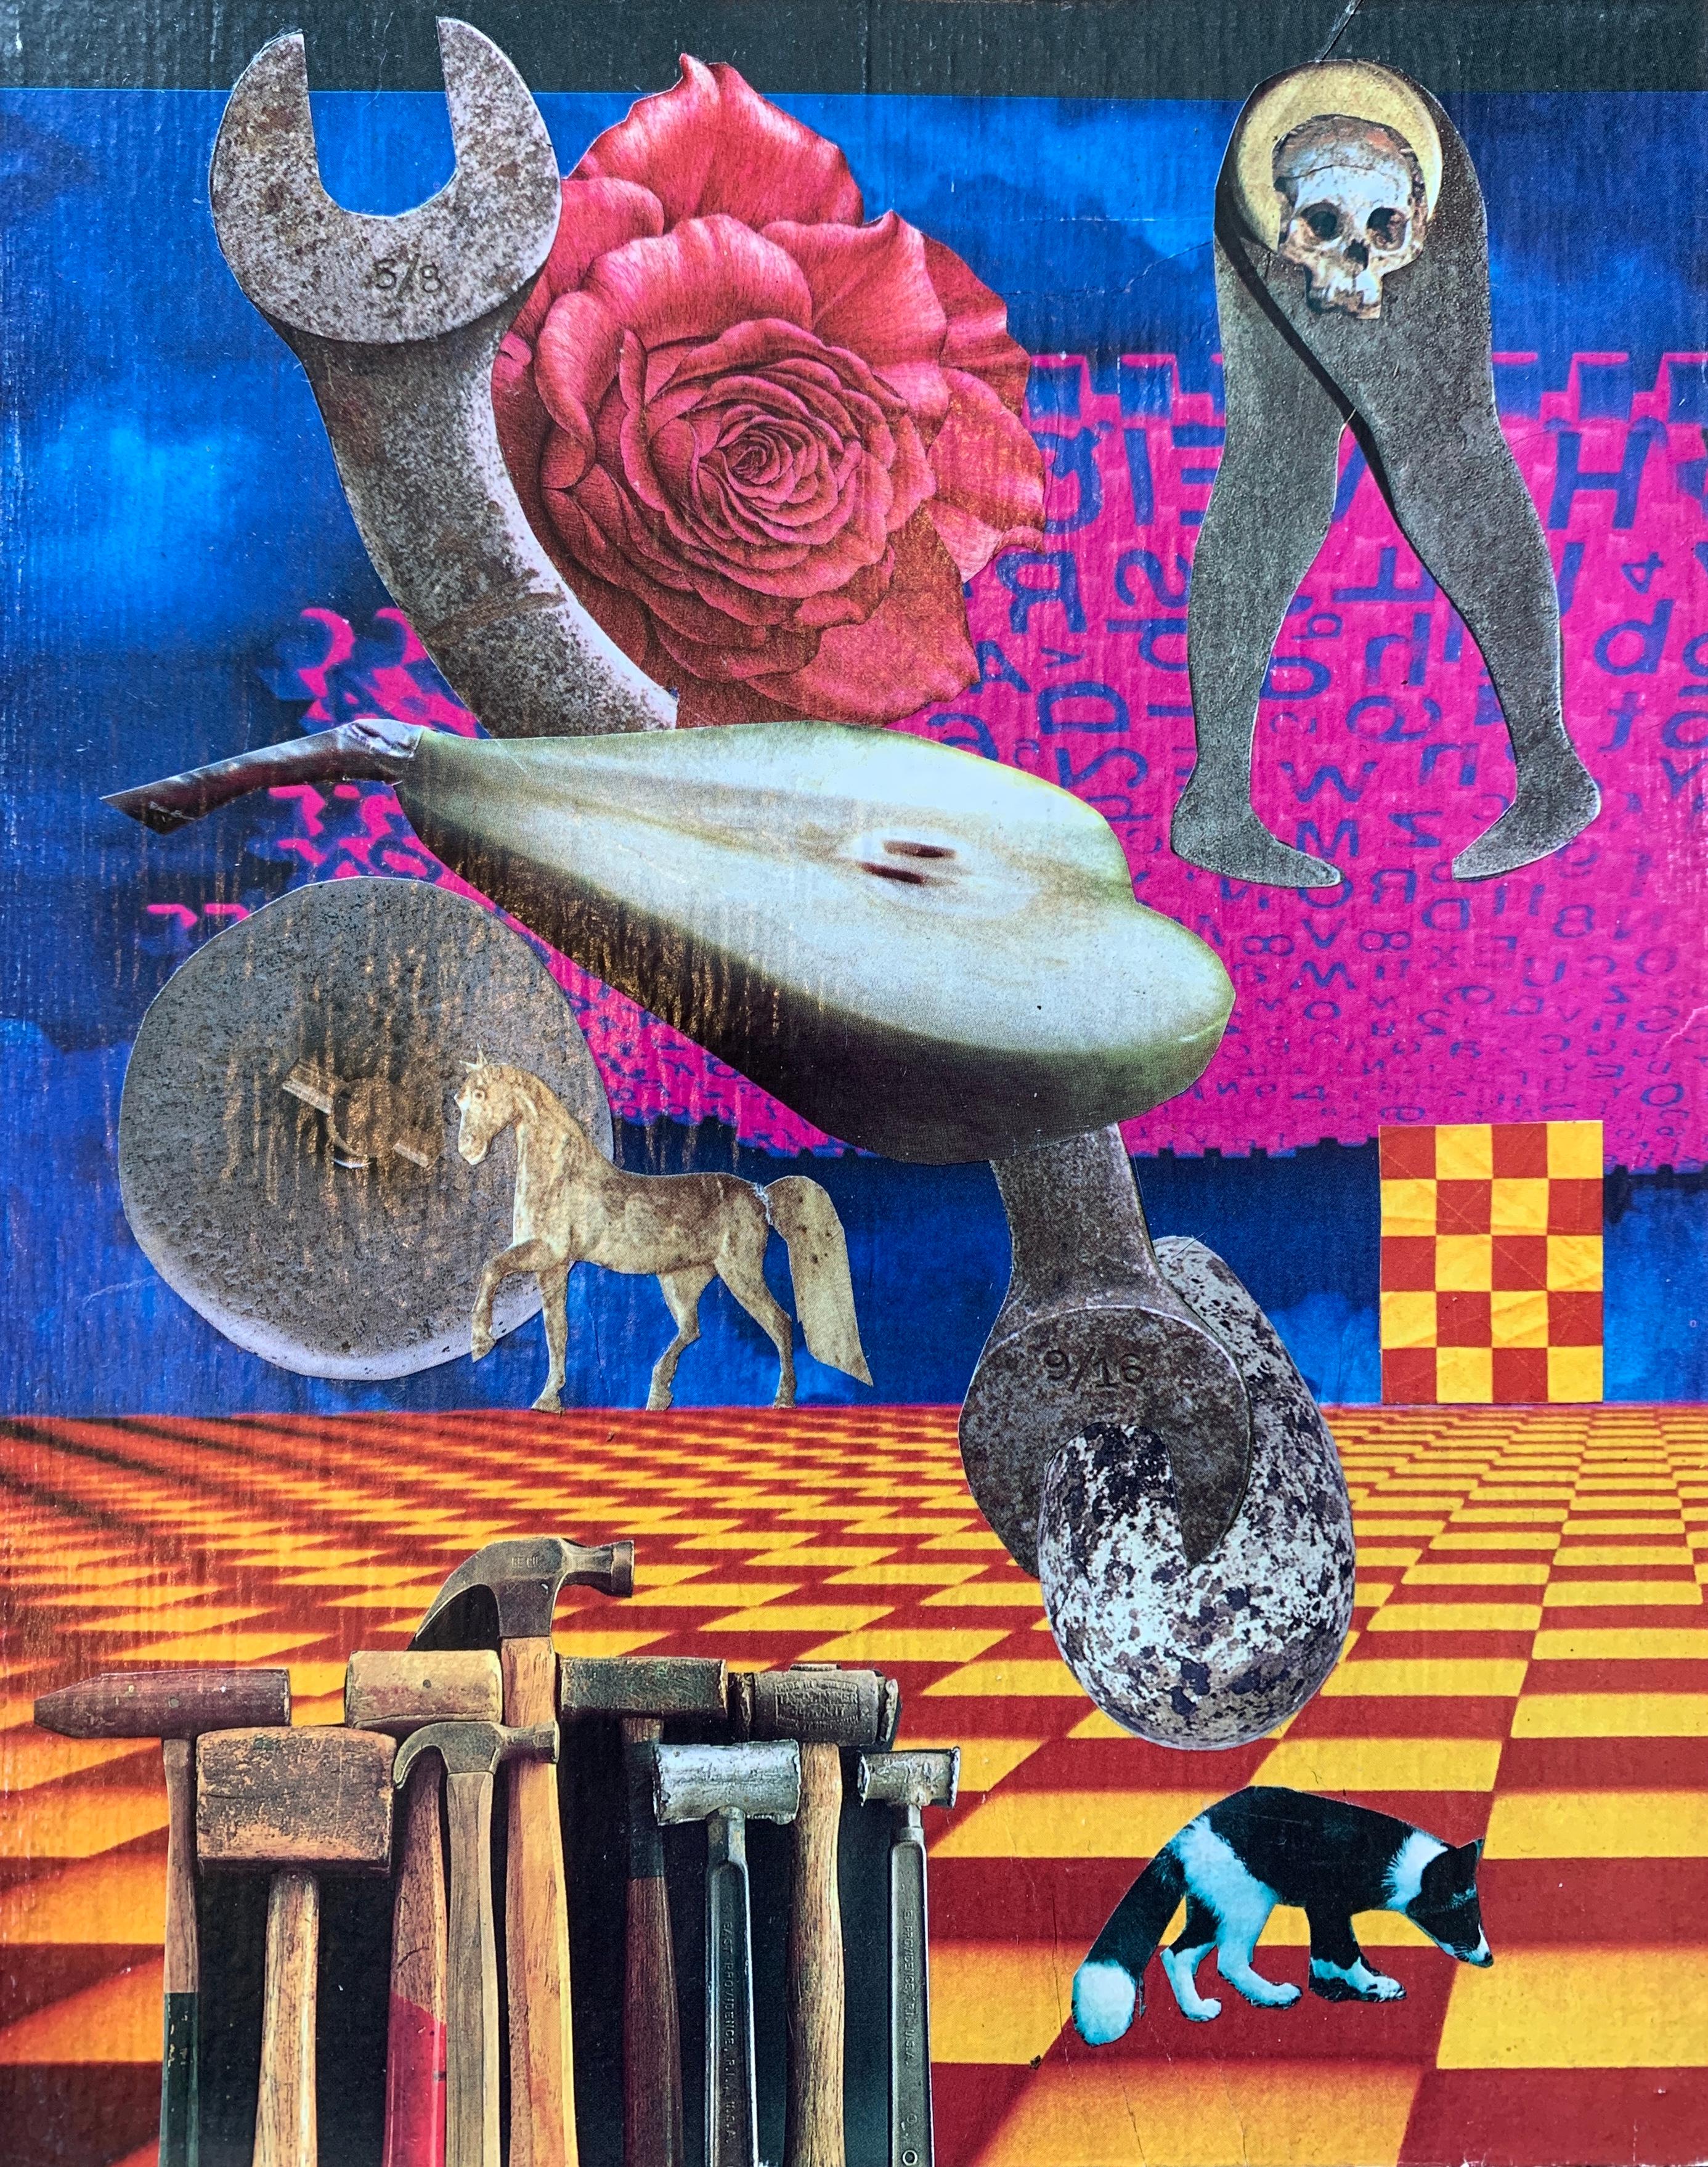 "The Pear, The Rose, The Wrench" Abstract Paper Collage John Peters 2005